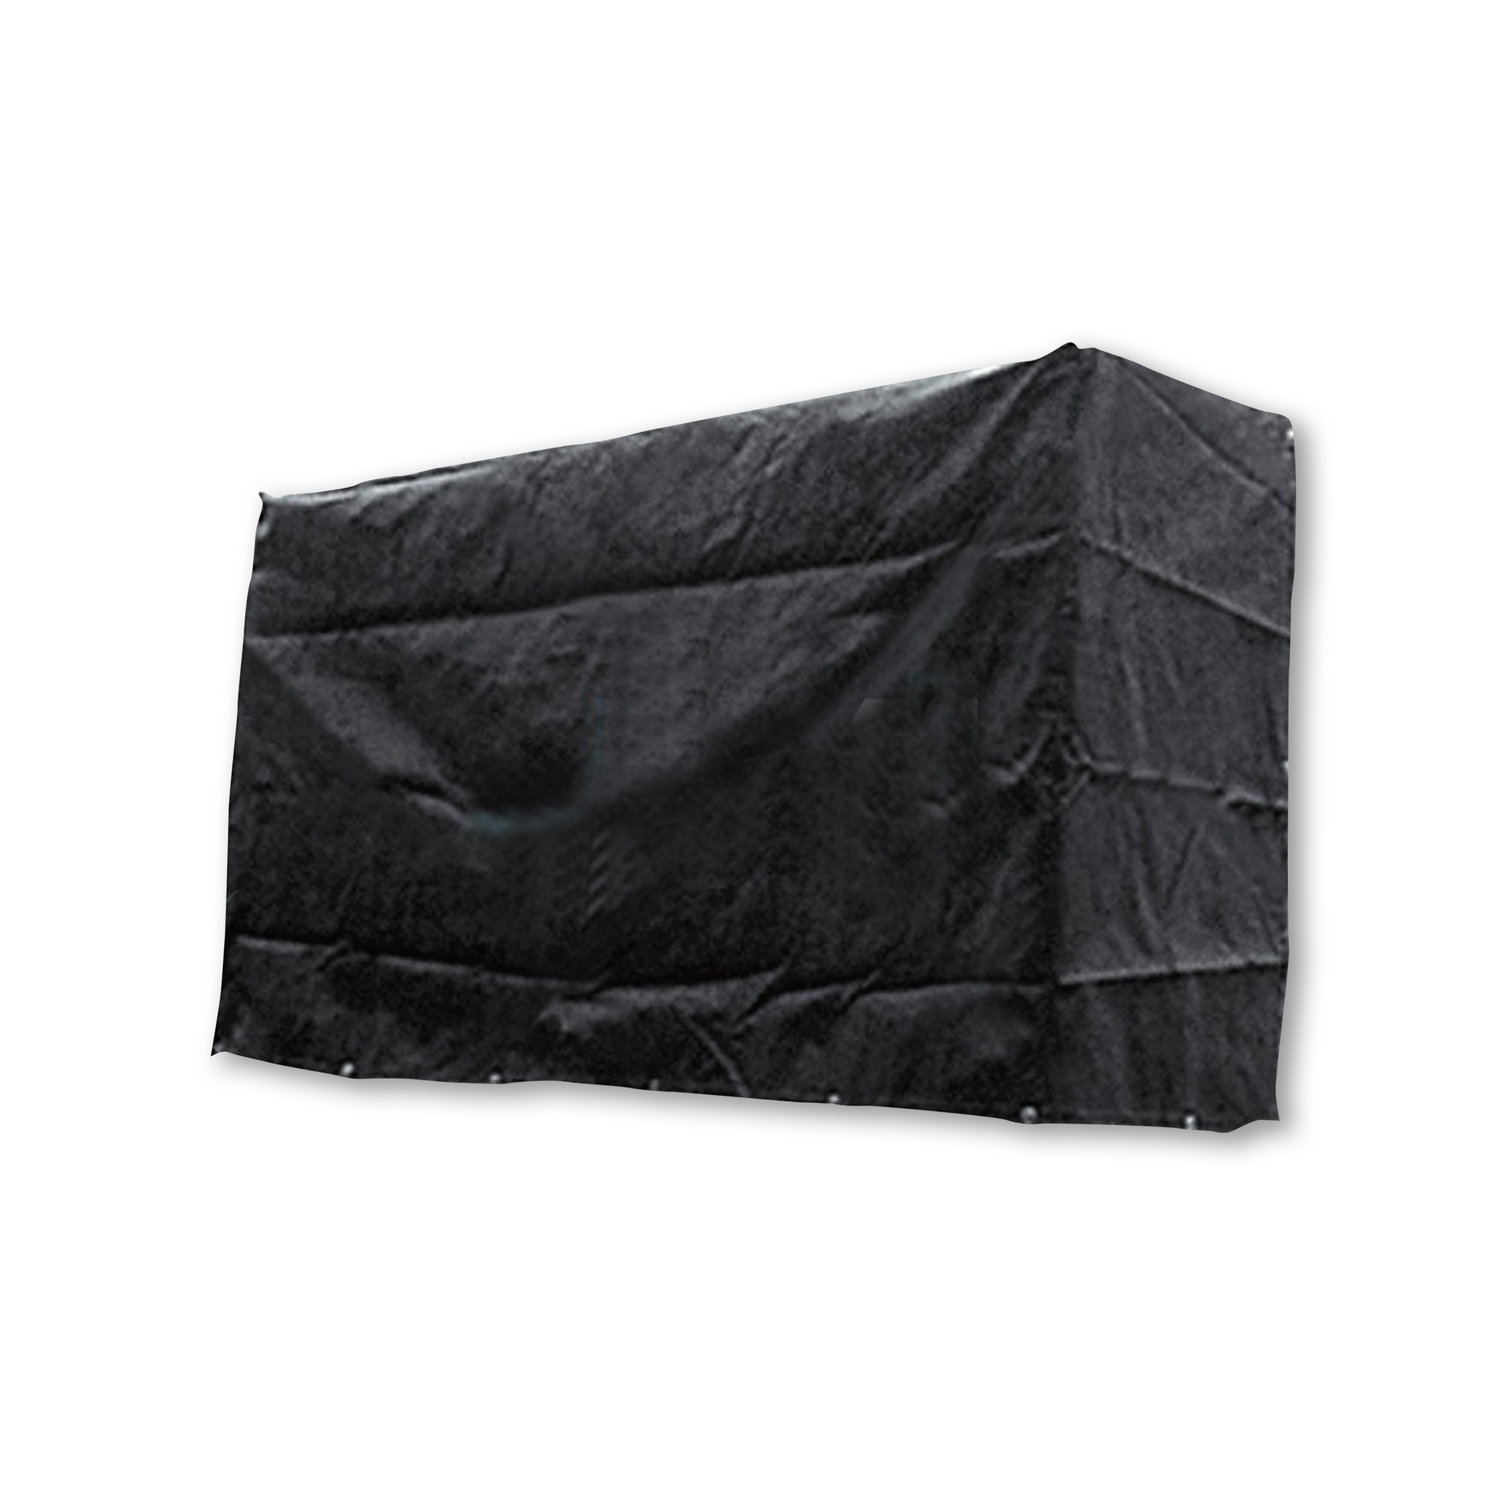 Truck Tarps - Specialty (coils bags, etc.)